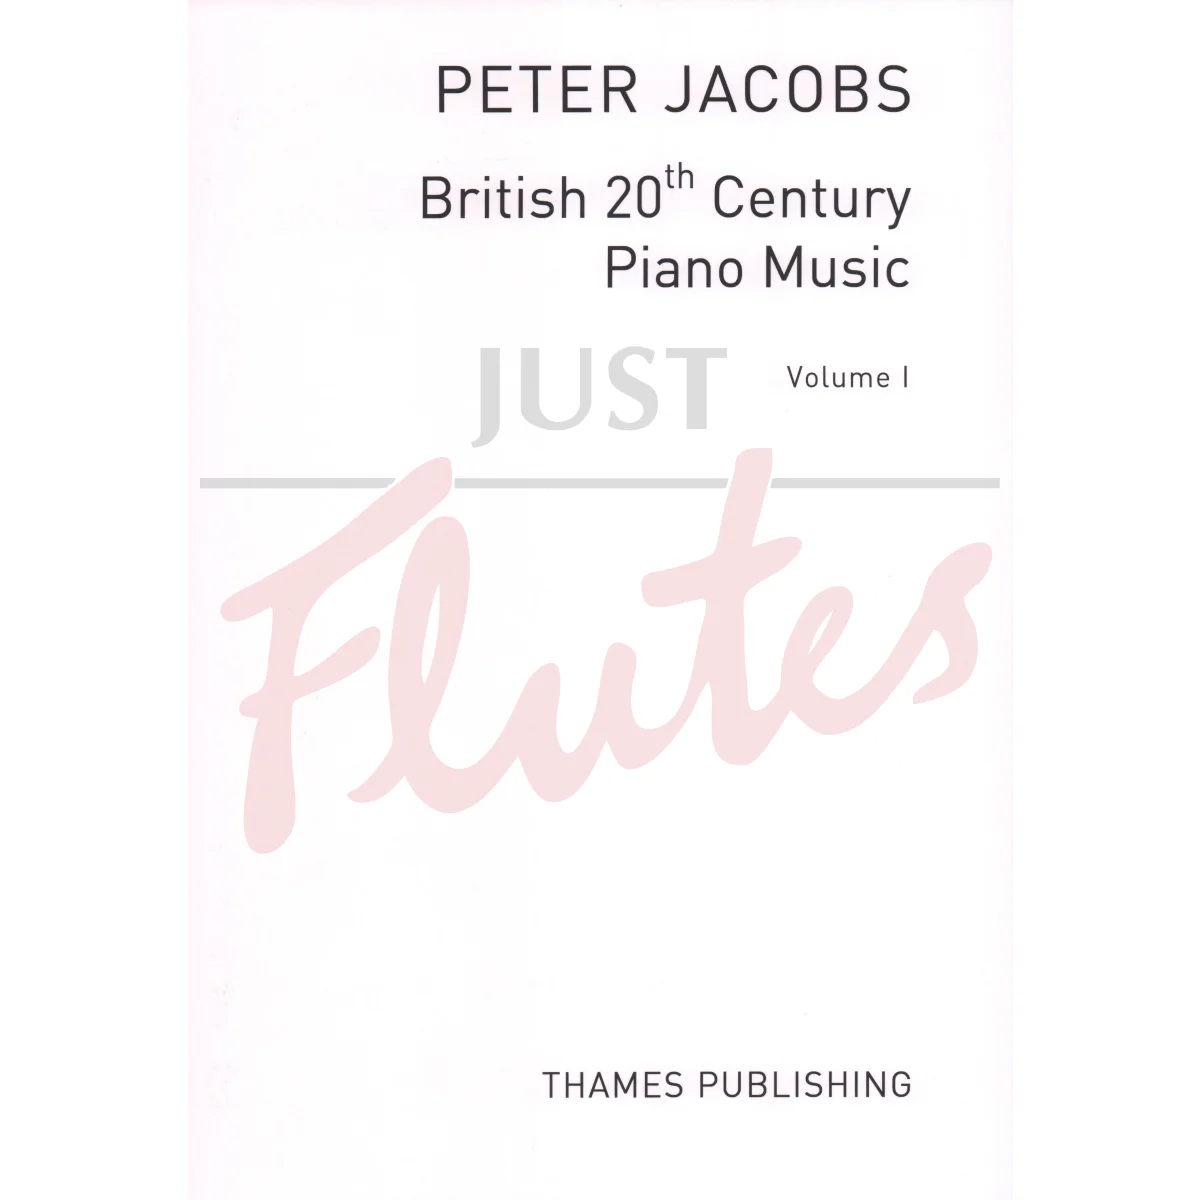 An Anthology of British 20th Century Piano Music Vol 1